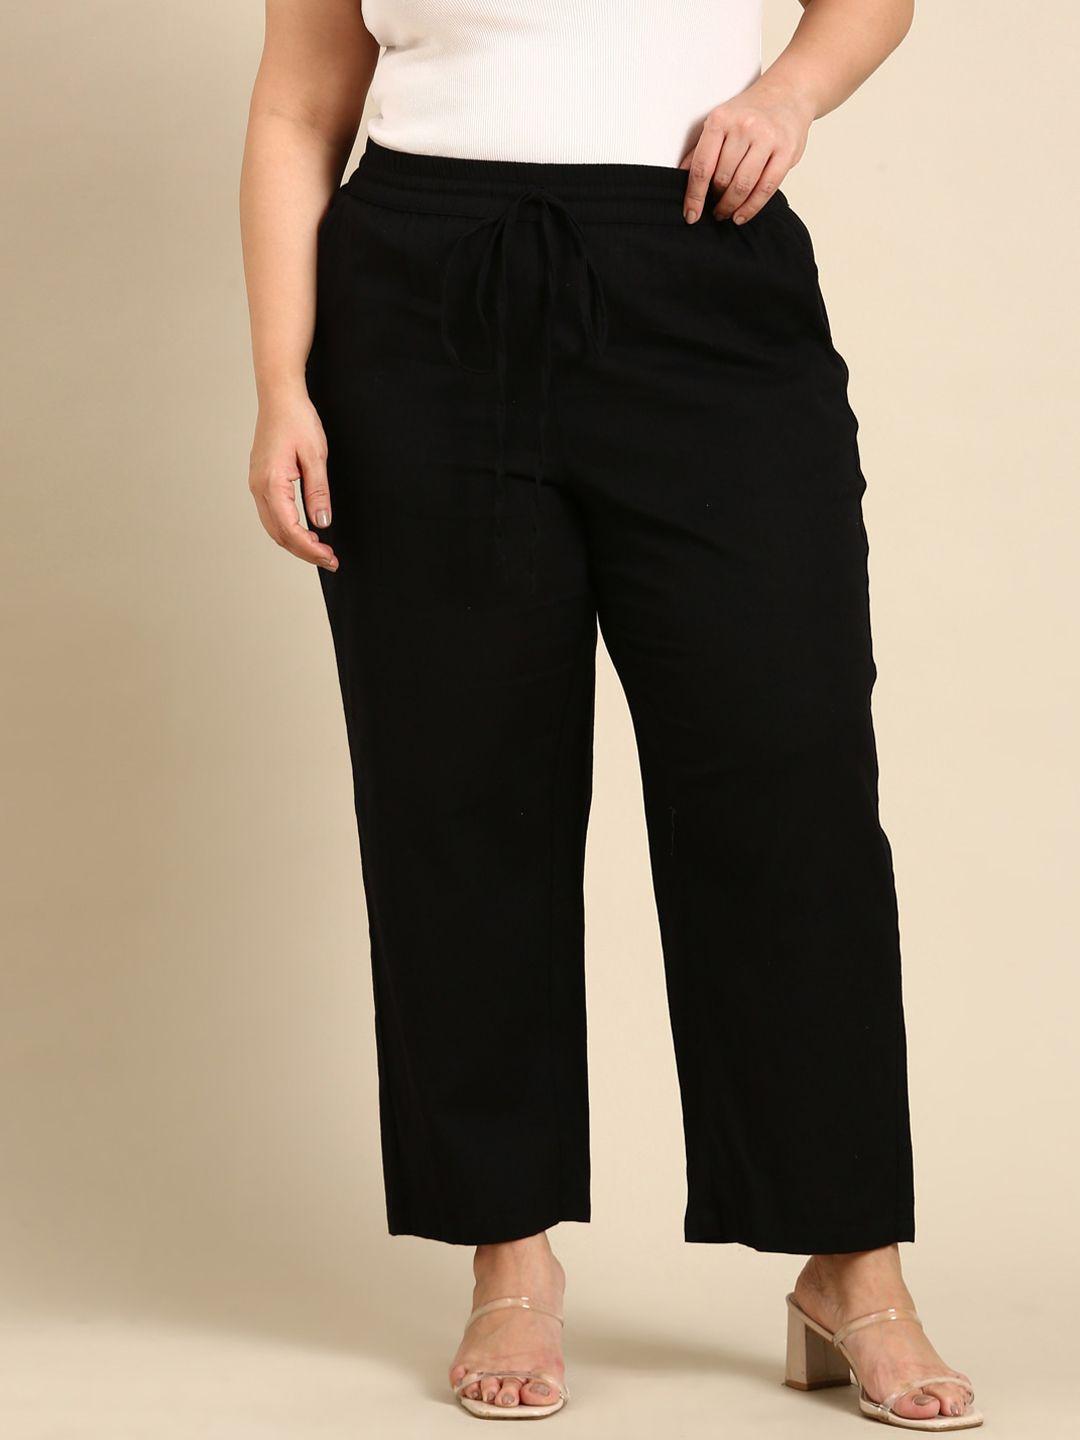 the-pink-moon-women-plus-size-loose-fit-high-rise-cotton-linen-trousers